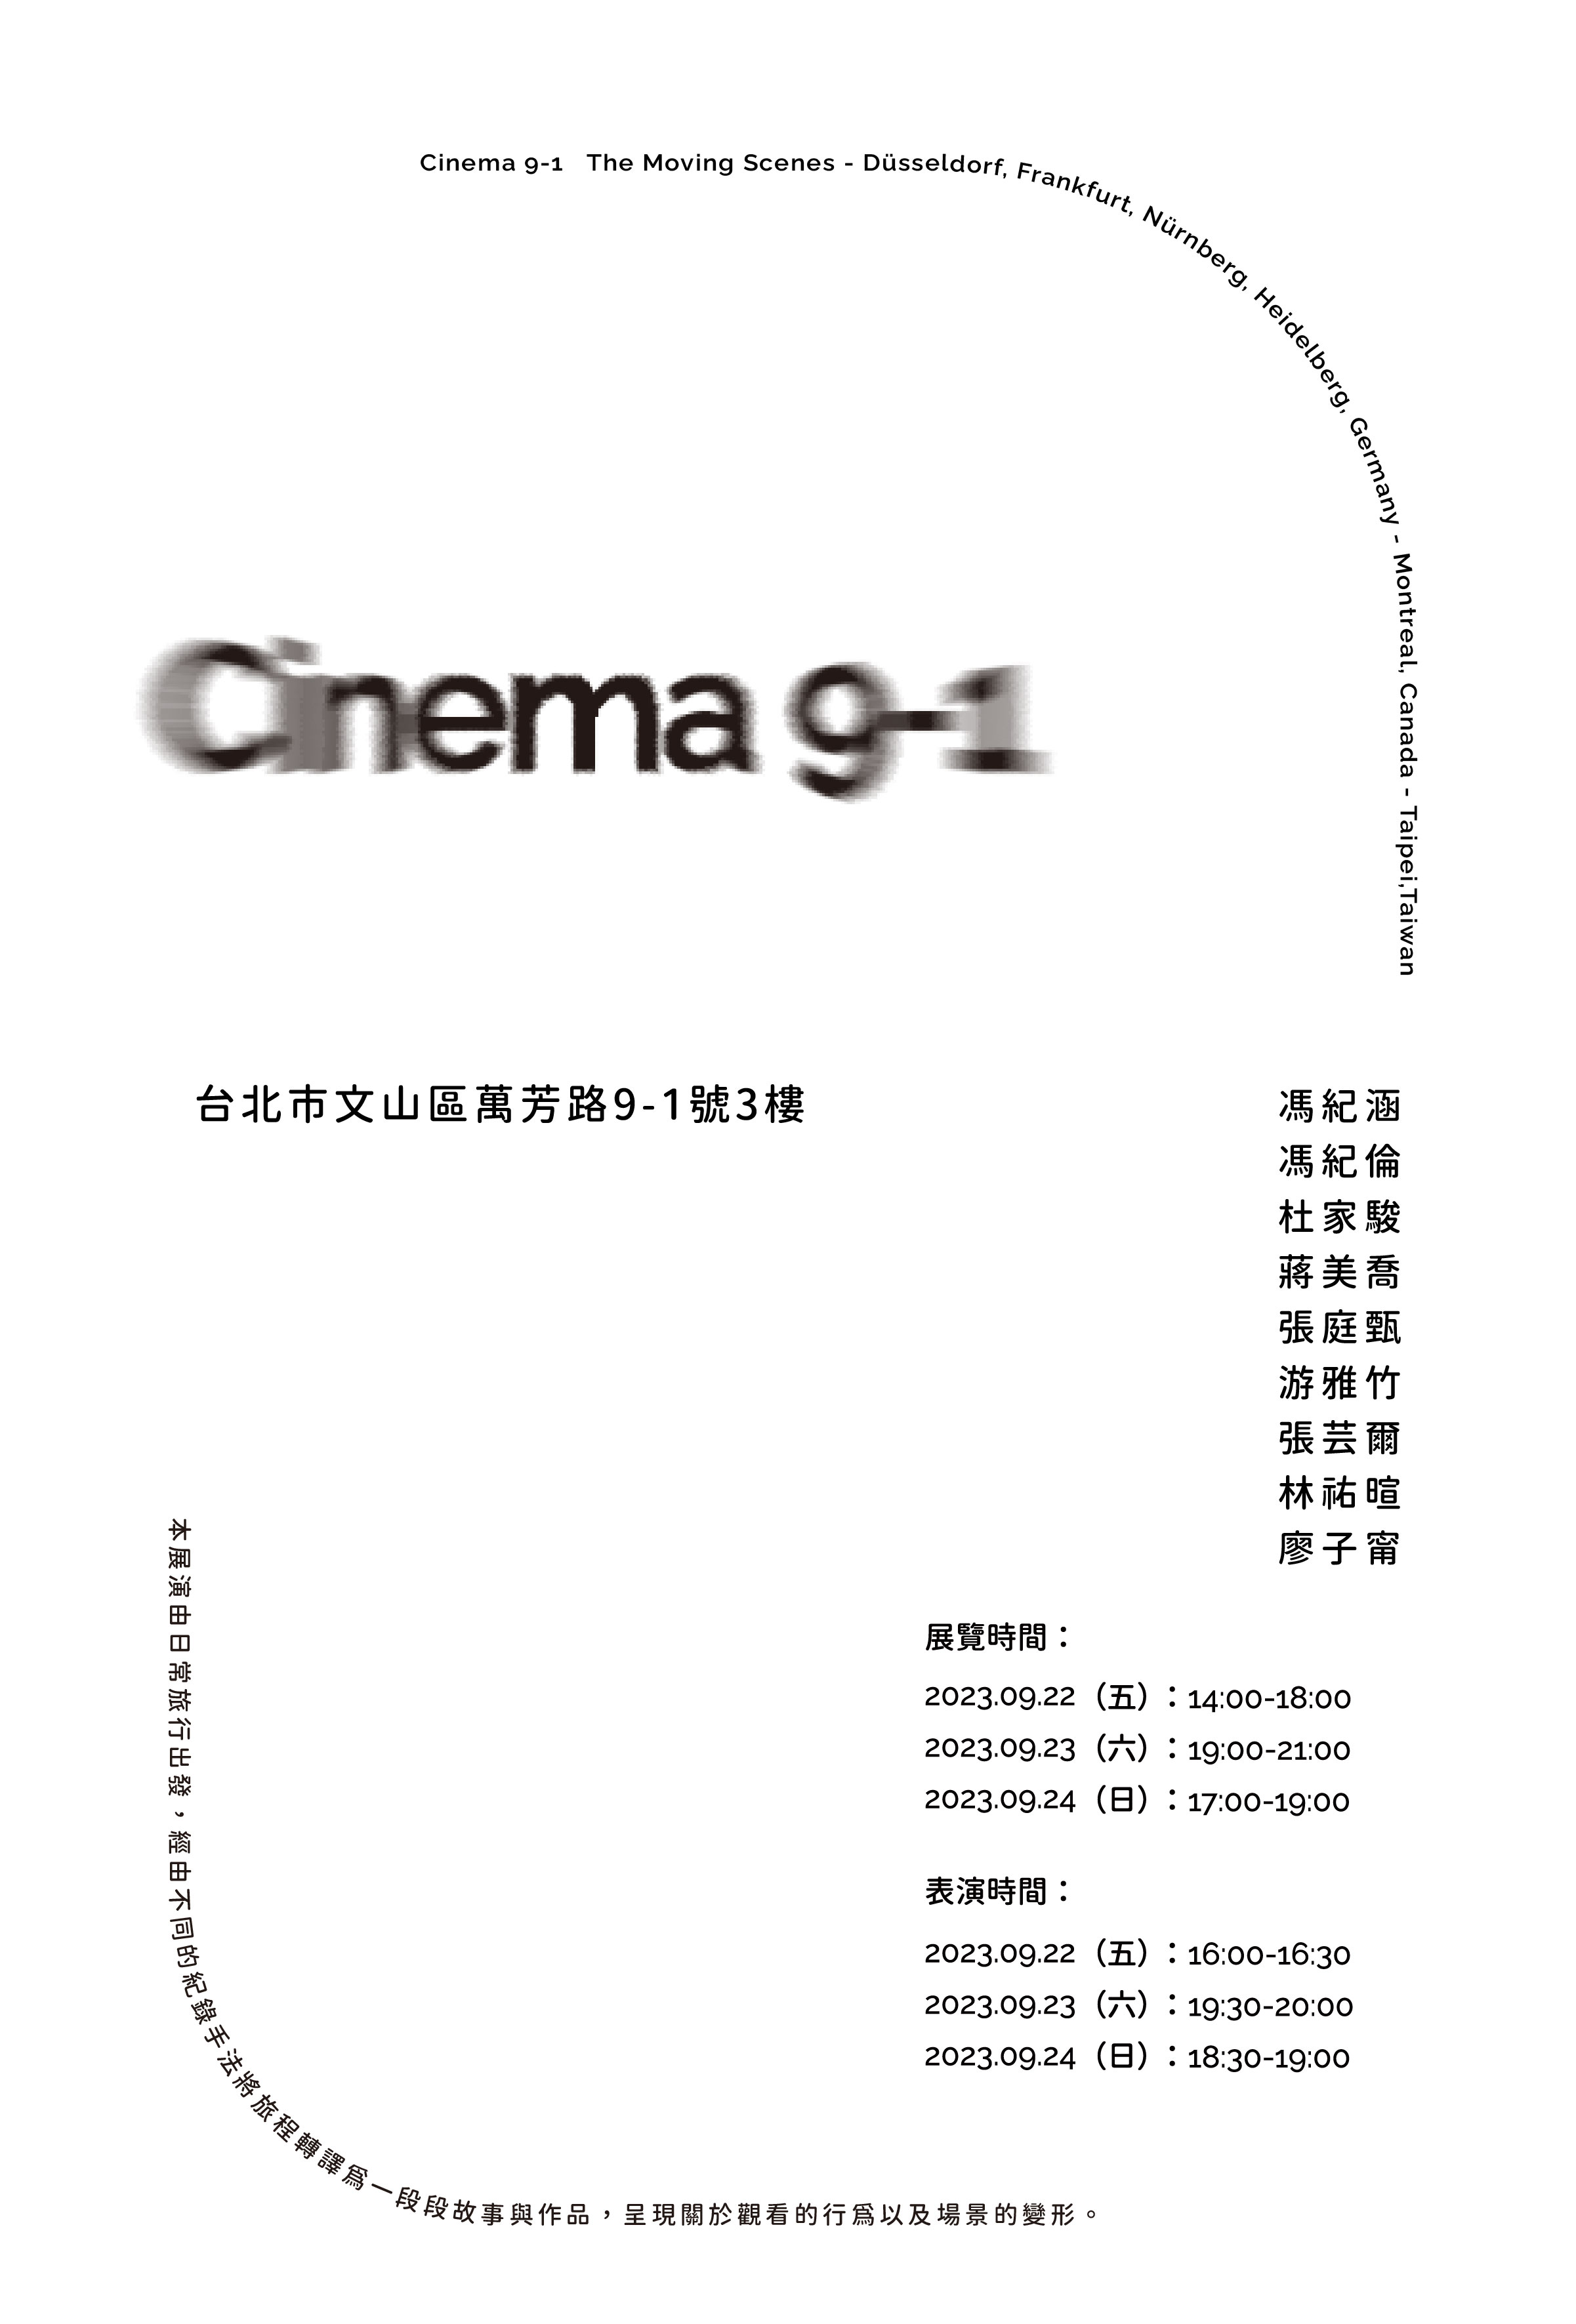 Exhibition 'Cinema 9-1' poster, with Artists' name, venue and time of the performances and the exhibition.